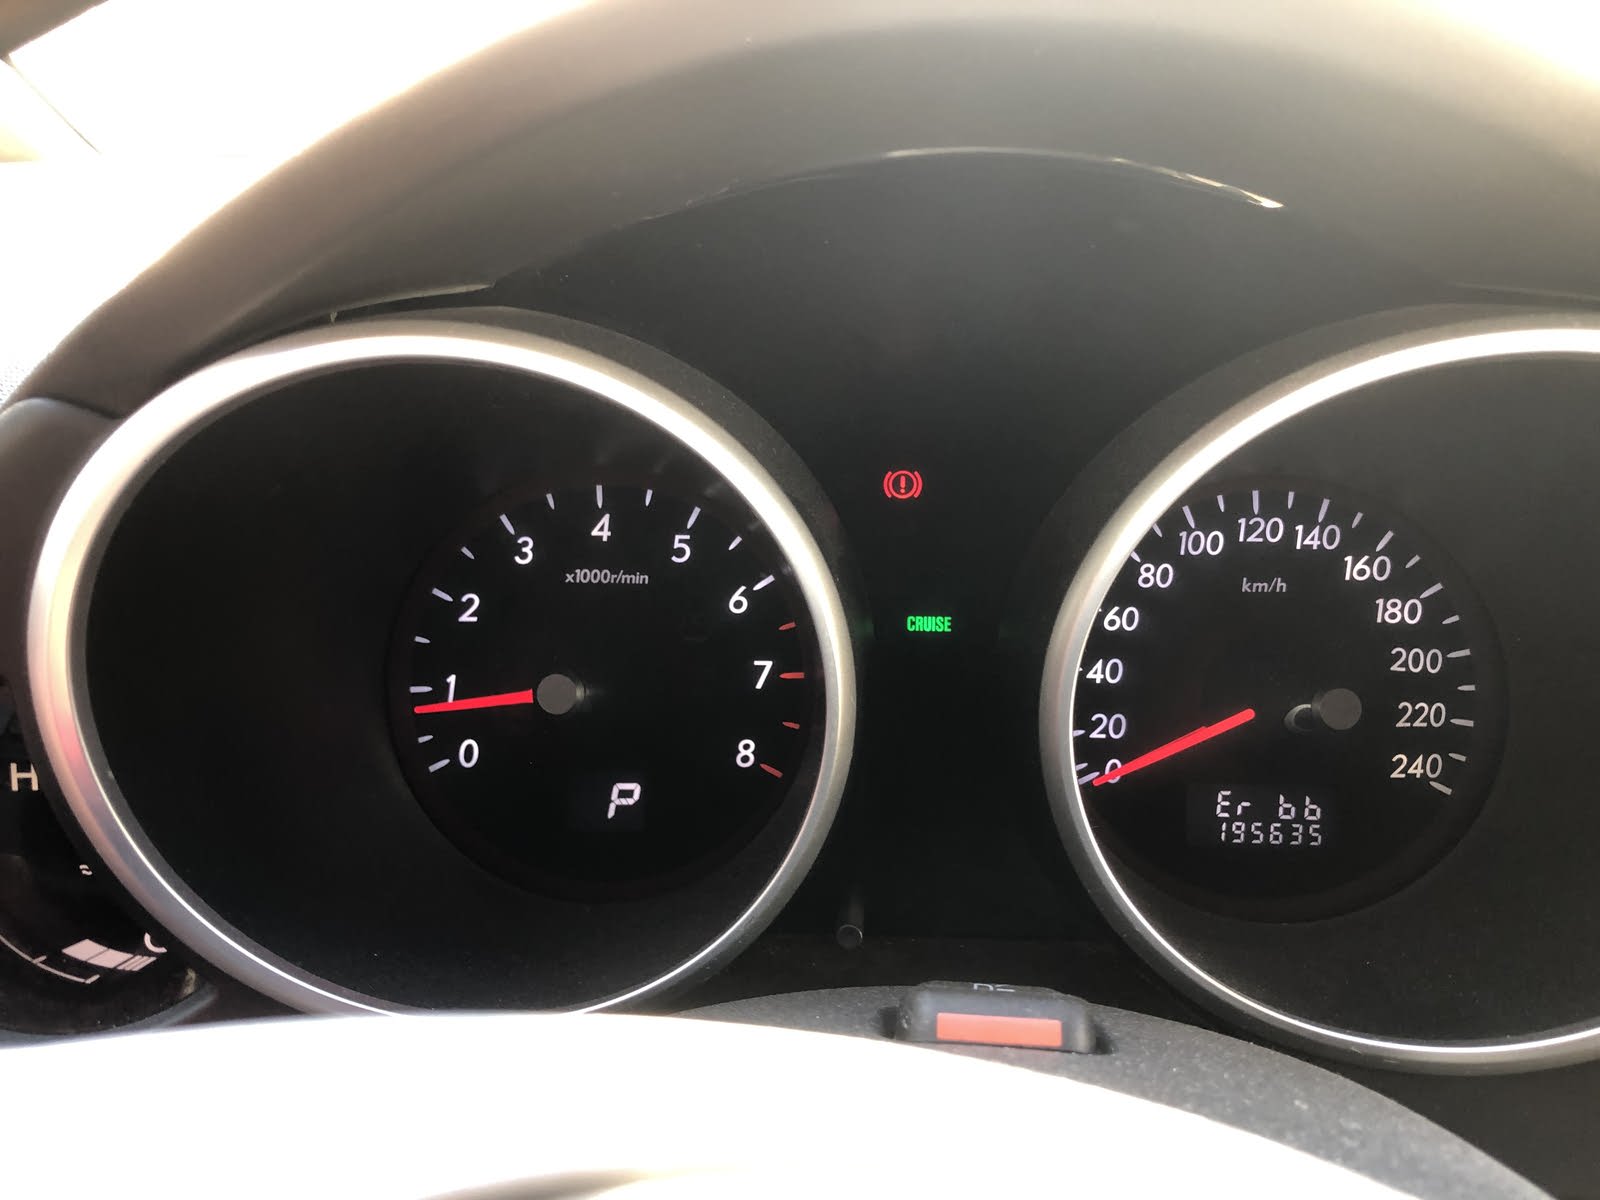 Subaru B9 Tribeca Questions - Er bb code is on odometer. Check engine